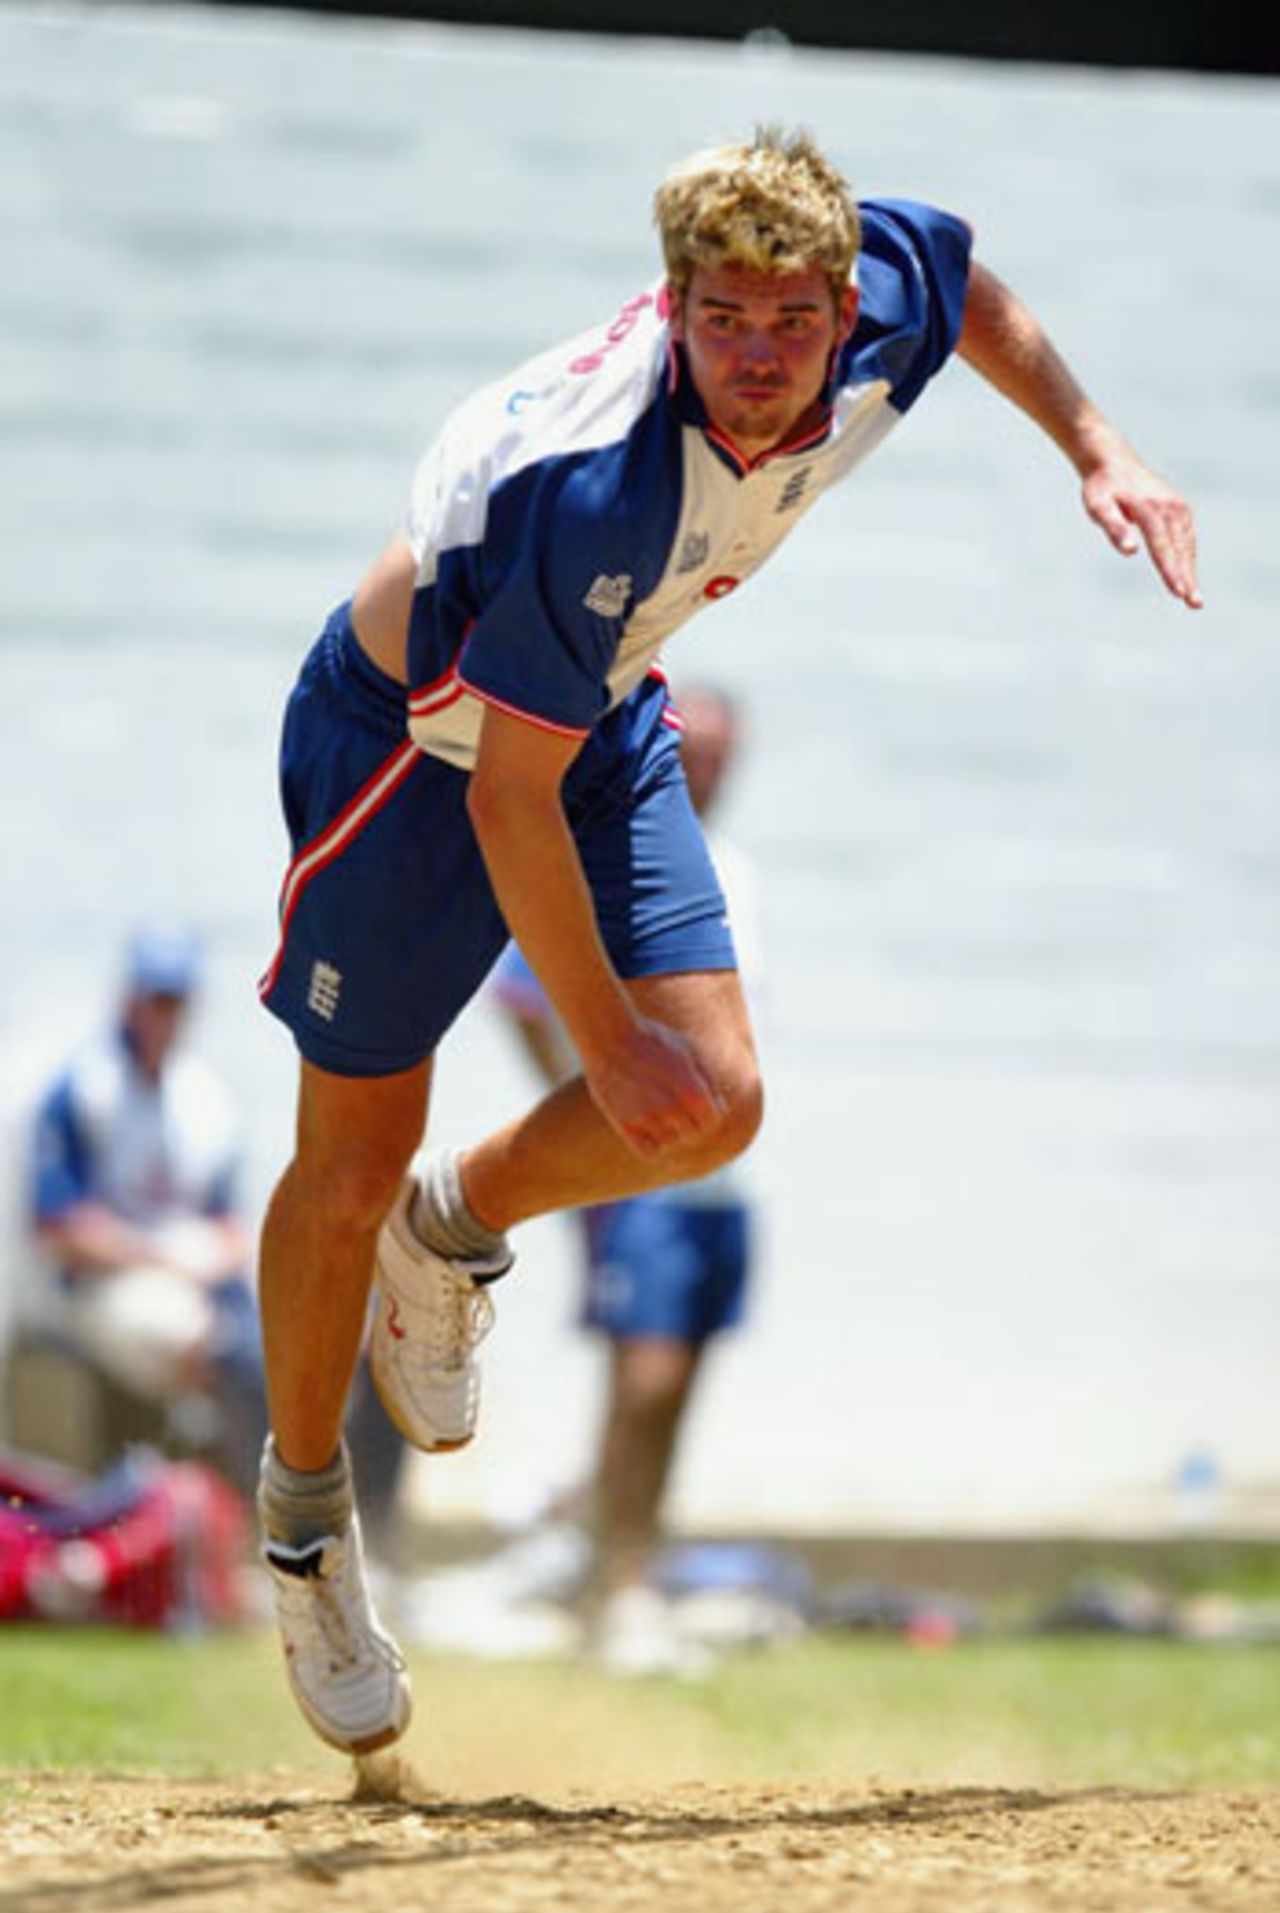 James Anderson bowling in the nets, Trinidad, April 22, 2004